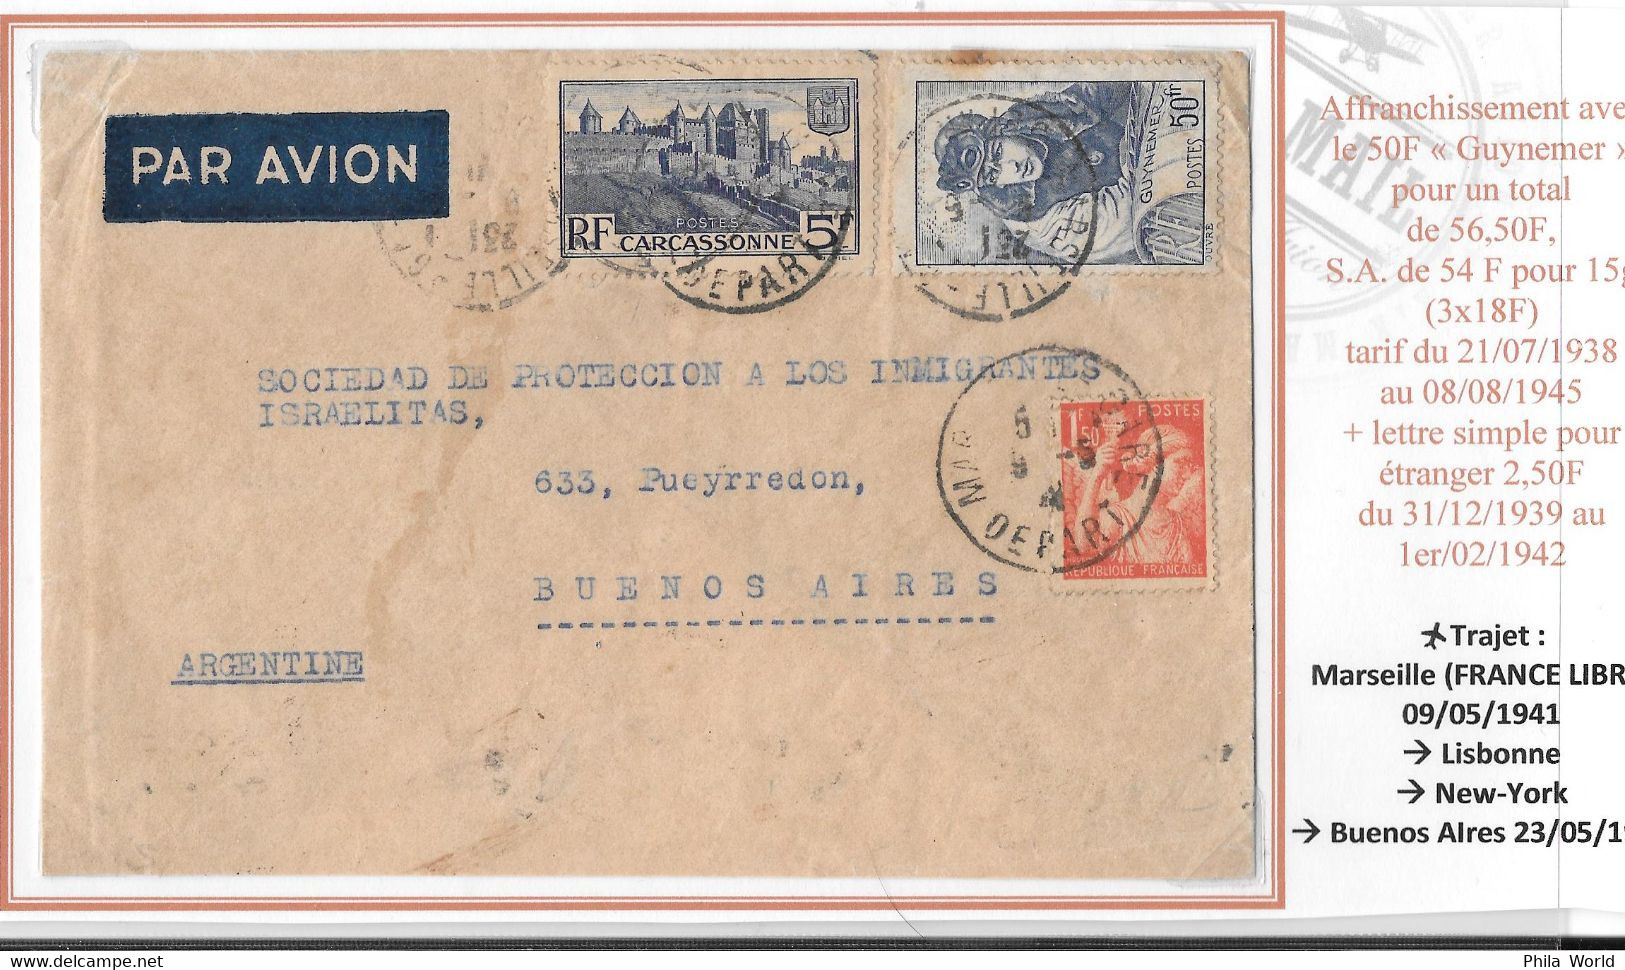 LATI - FRANCE Zone Libre 1941 Marseille Airmail Cover > ARGENTINA Guynemer Stamp - Via ITALIA Roma - Not PANAM To Avoid - Flugzeuge